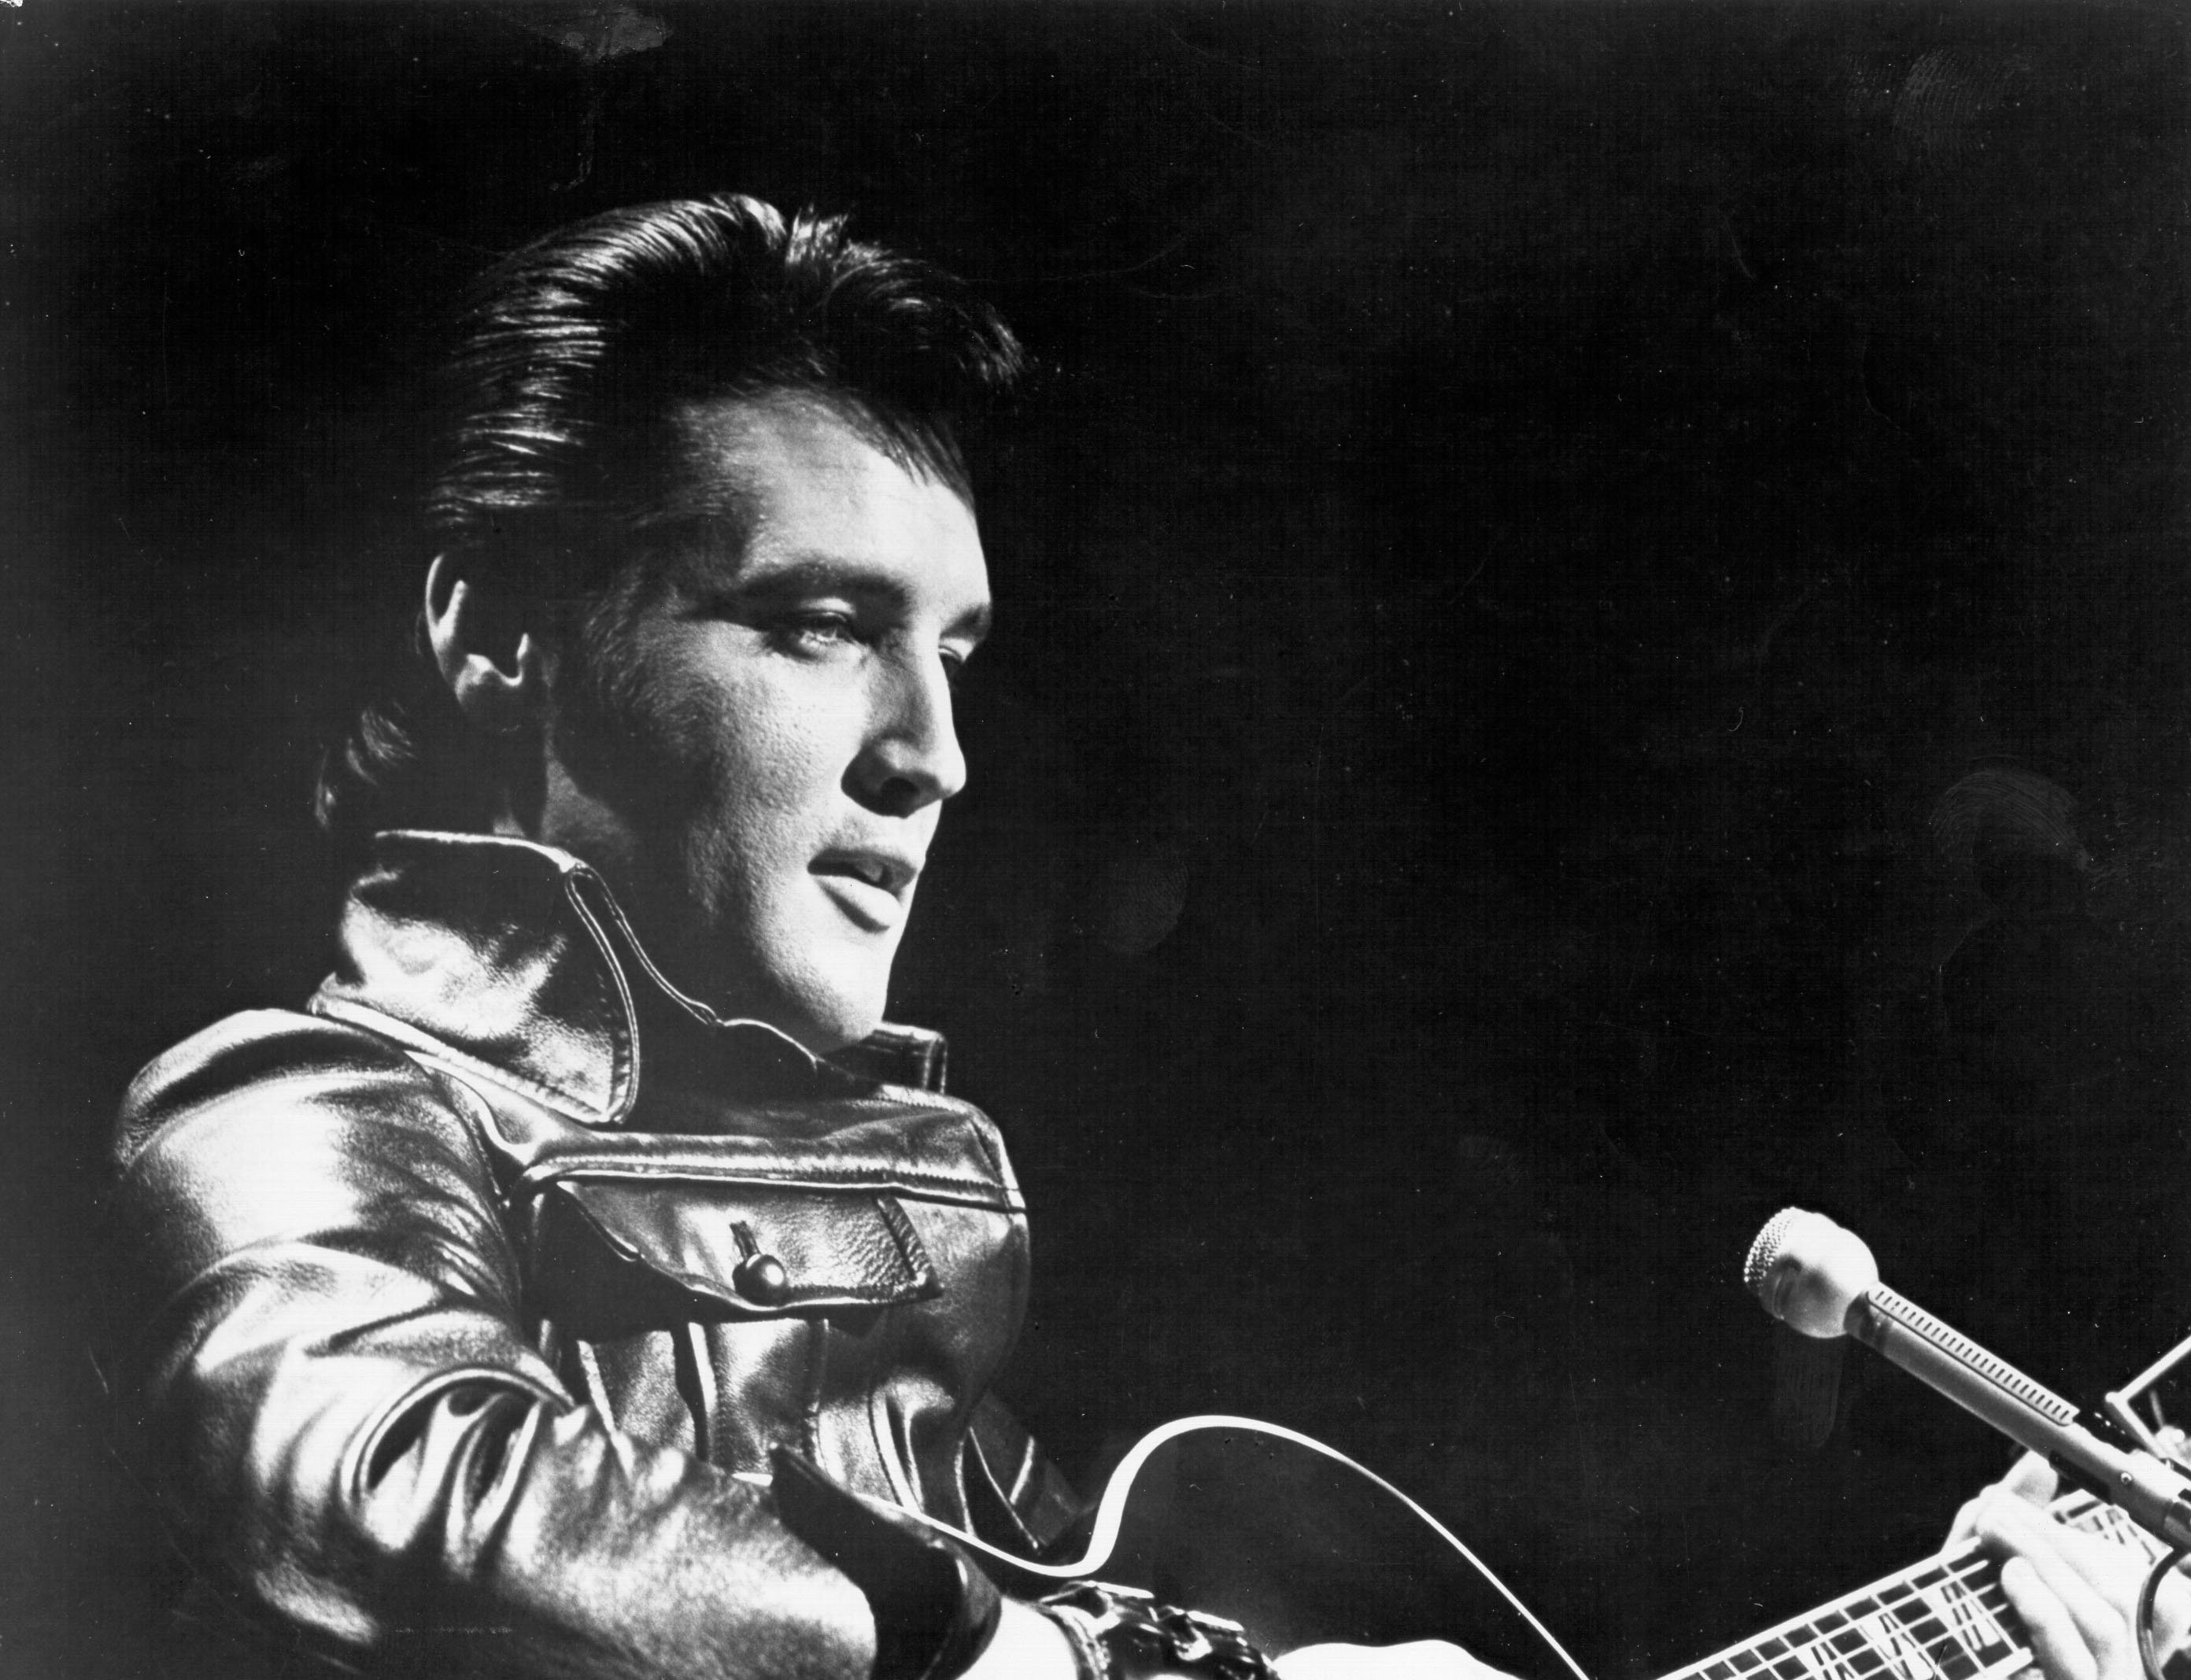 Elvis Presley in a leather jacket